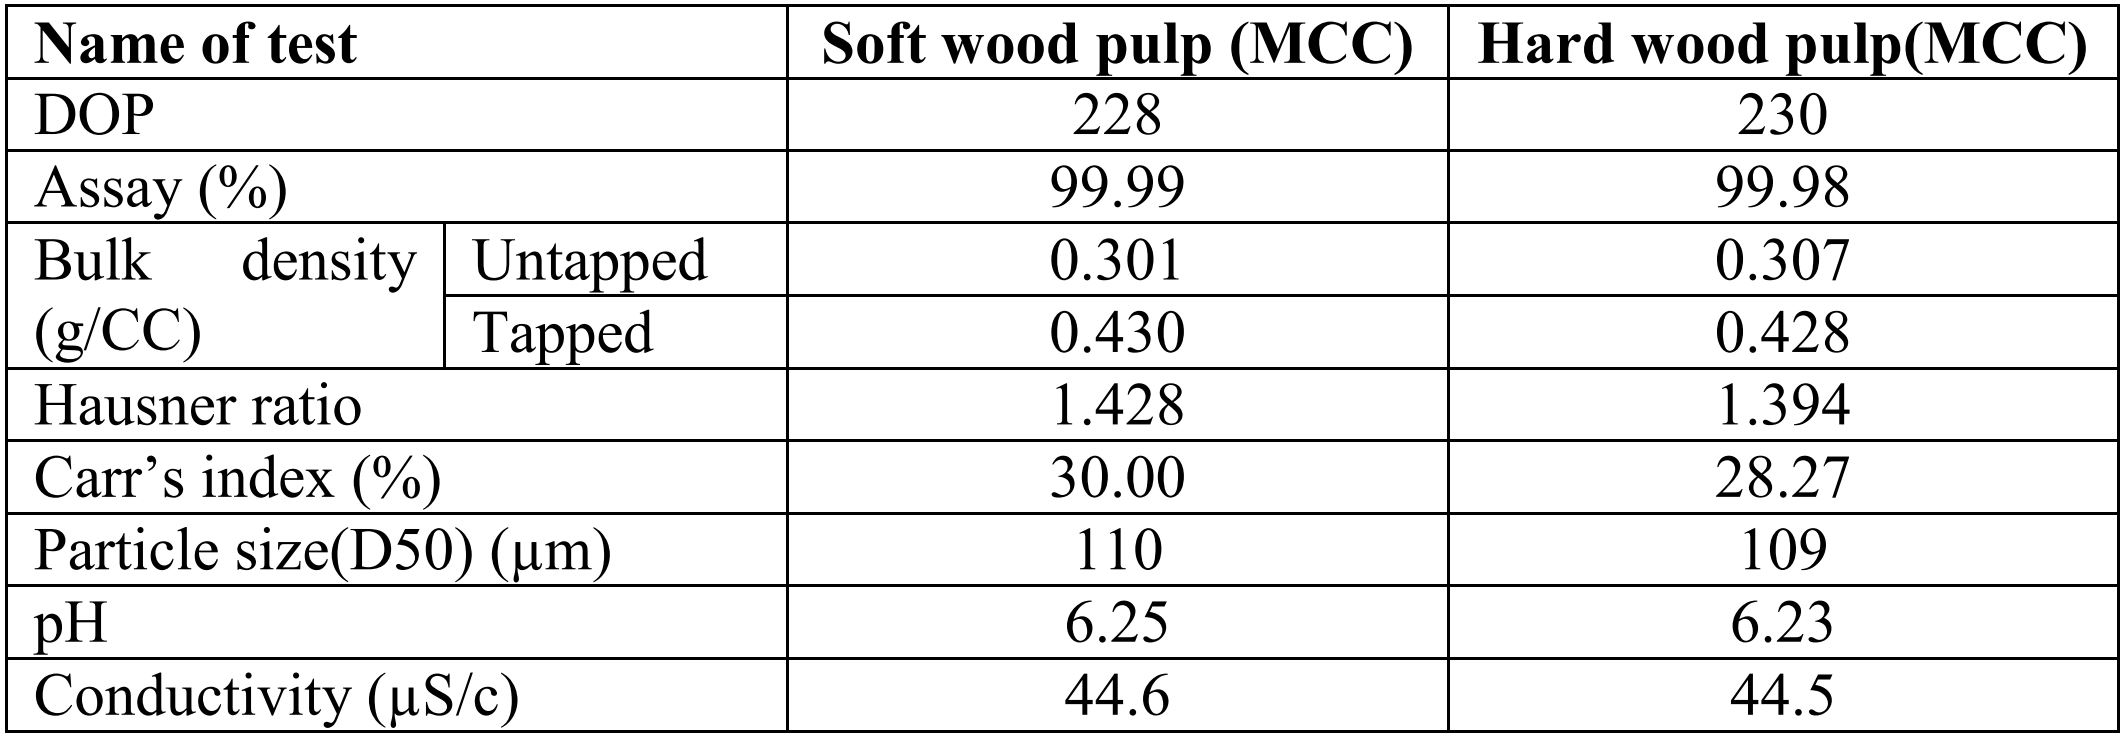 Table 2: Soft and hard wood pulp containing microcrystalline Cellulose result of physicochemical test.